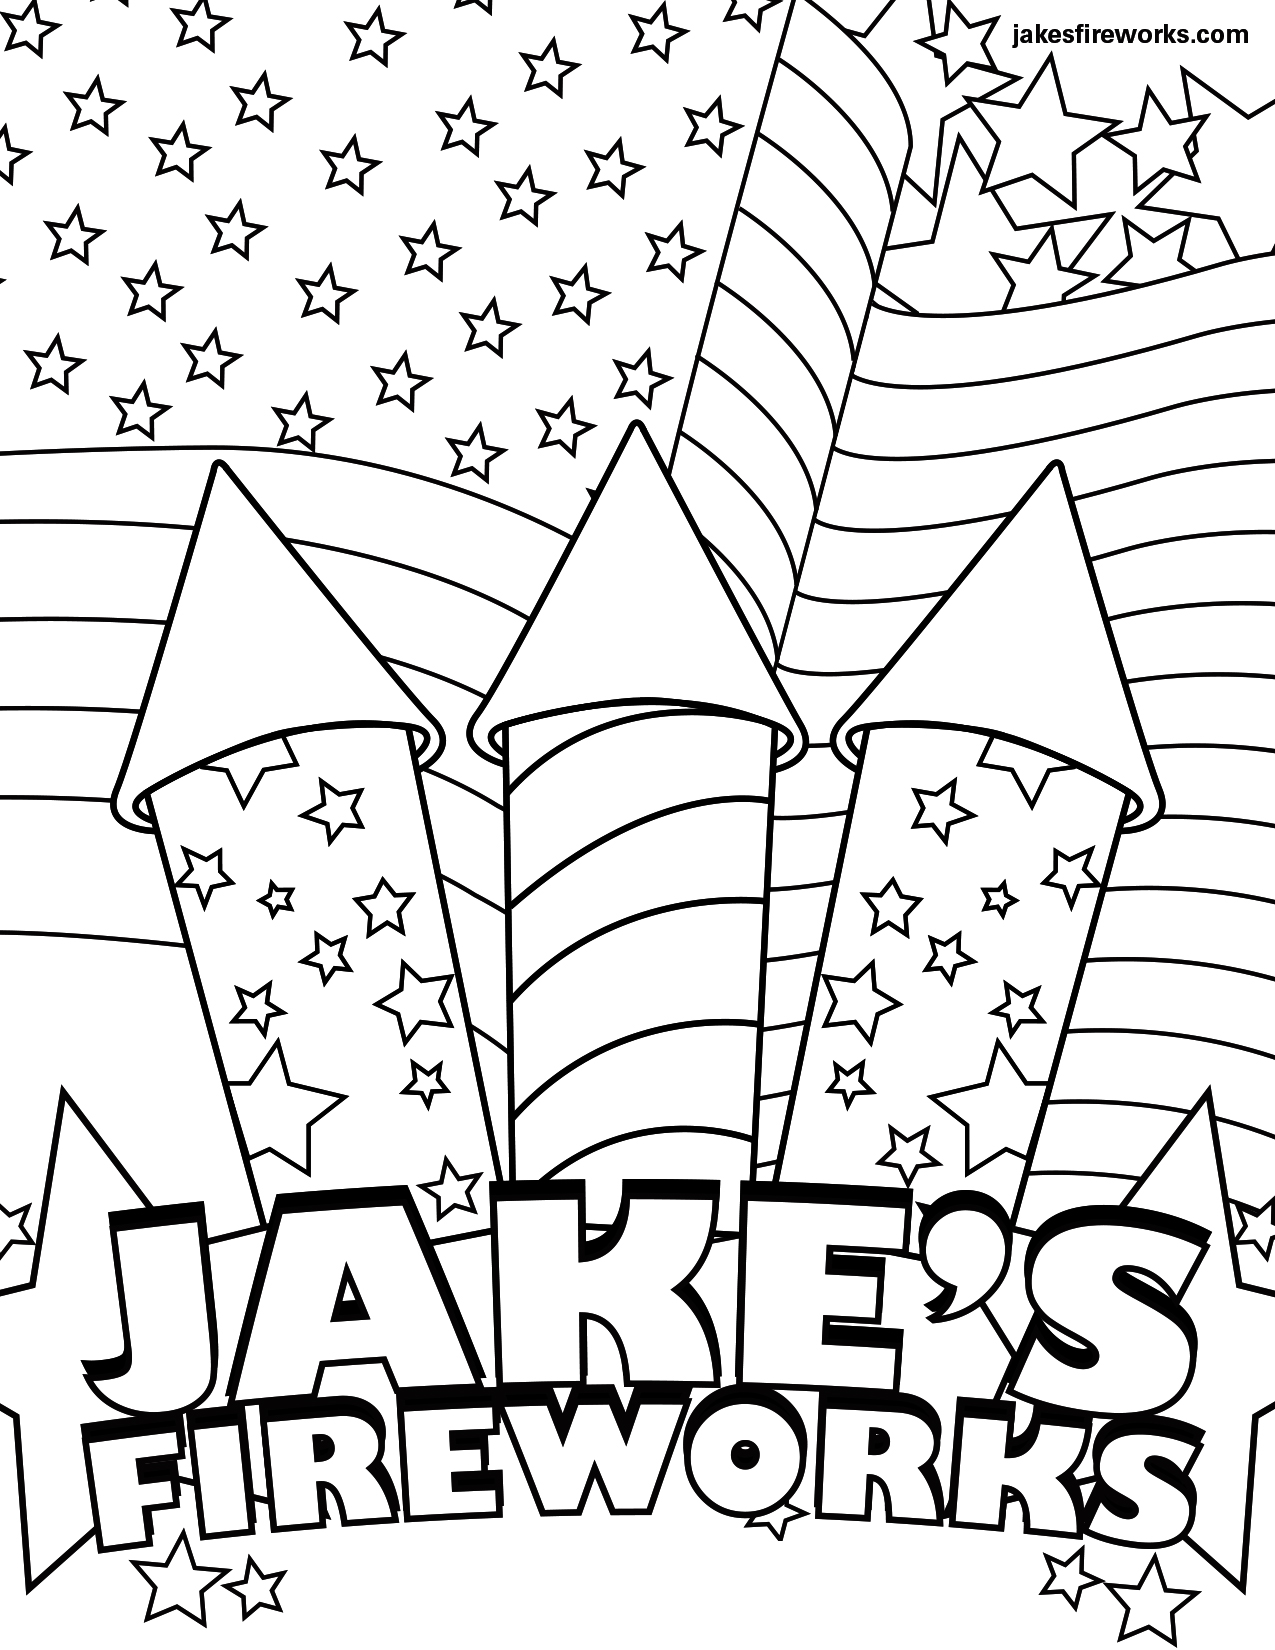 Free Coloring Pages of Fireworks